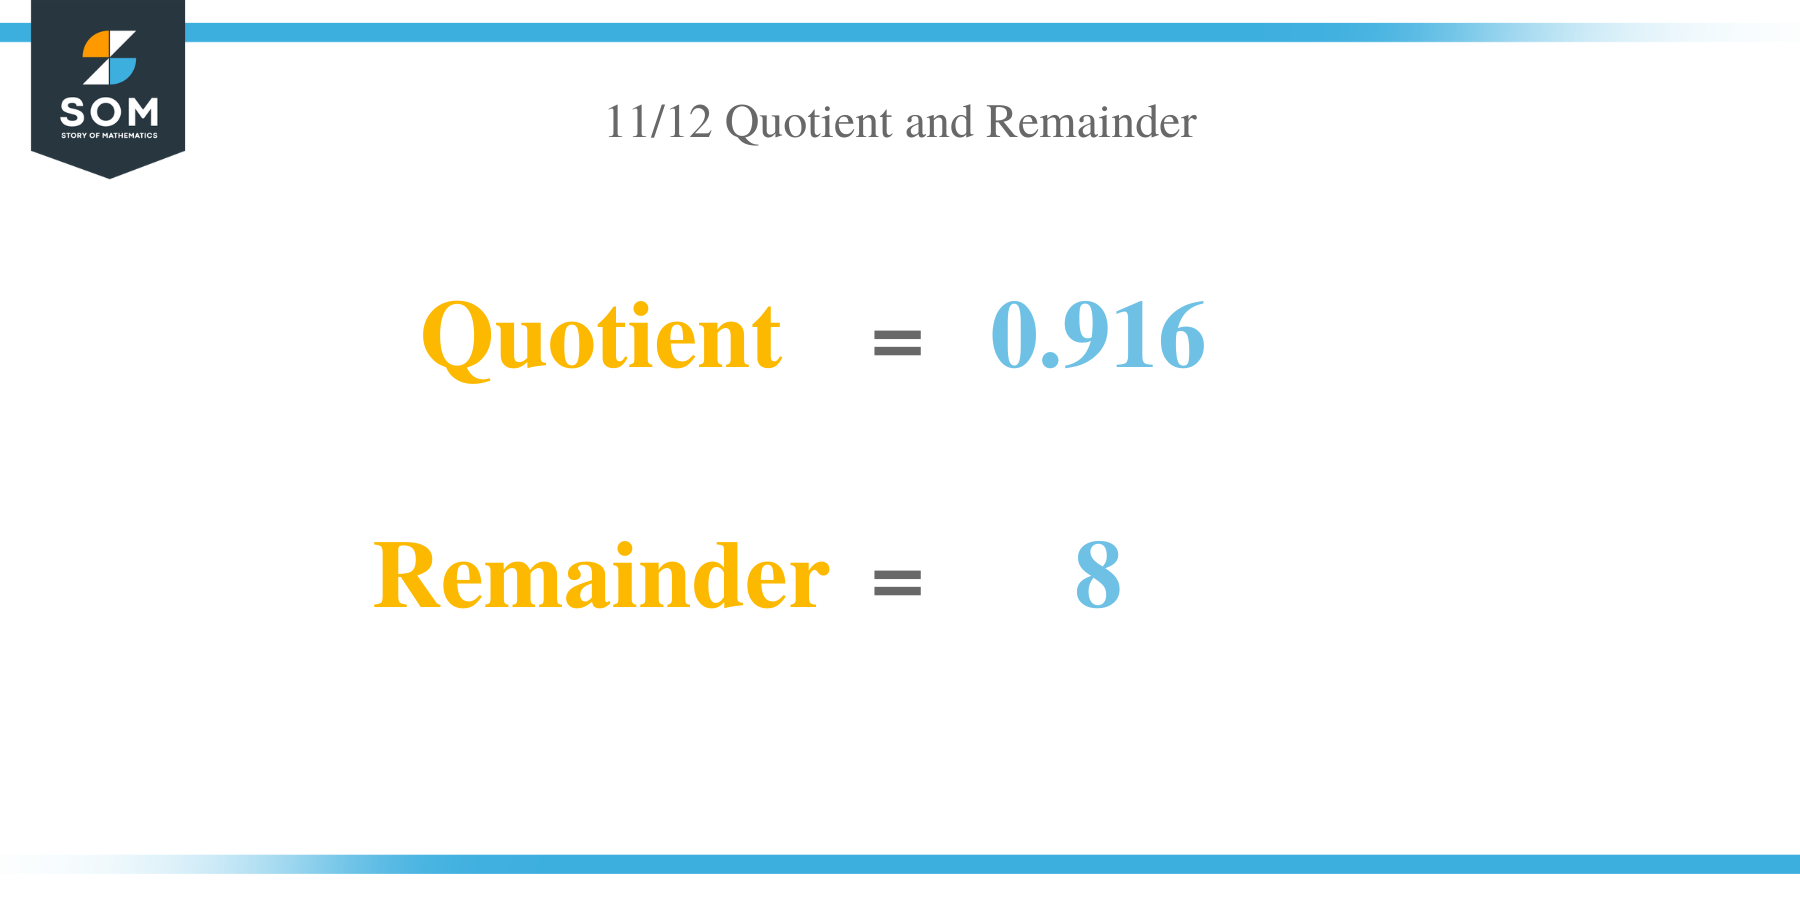 Quotient and Remainer of 11 per 12